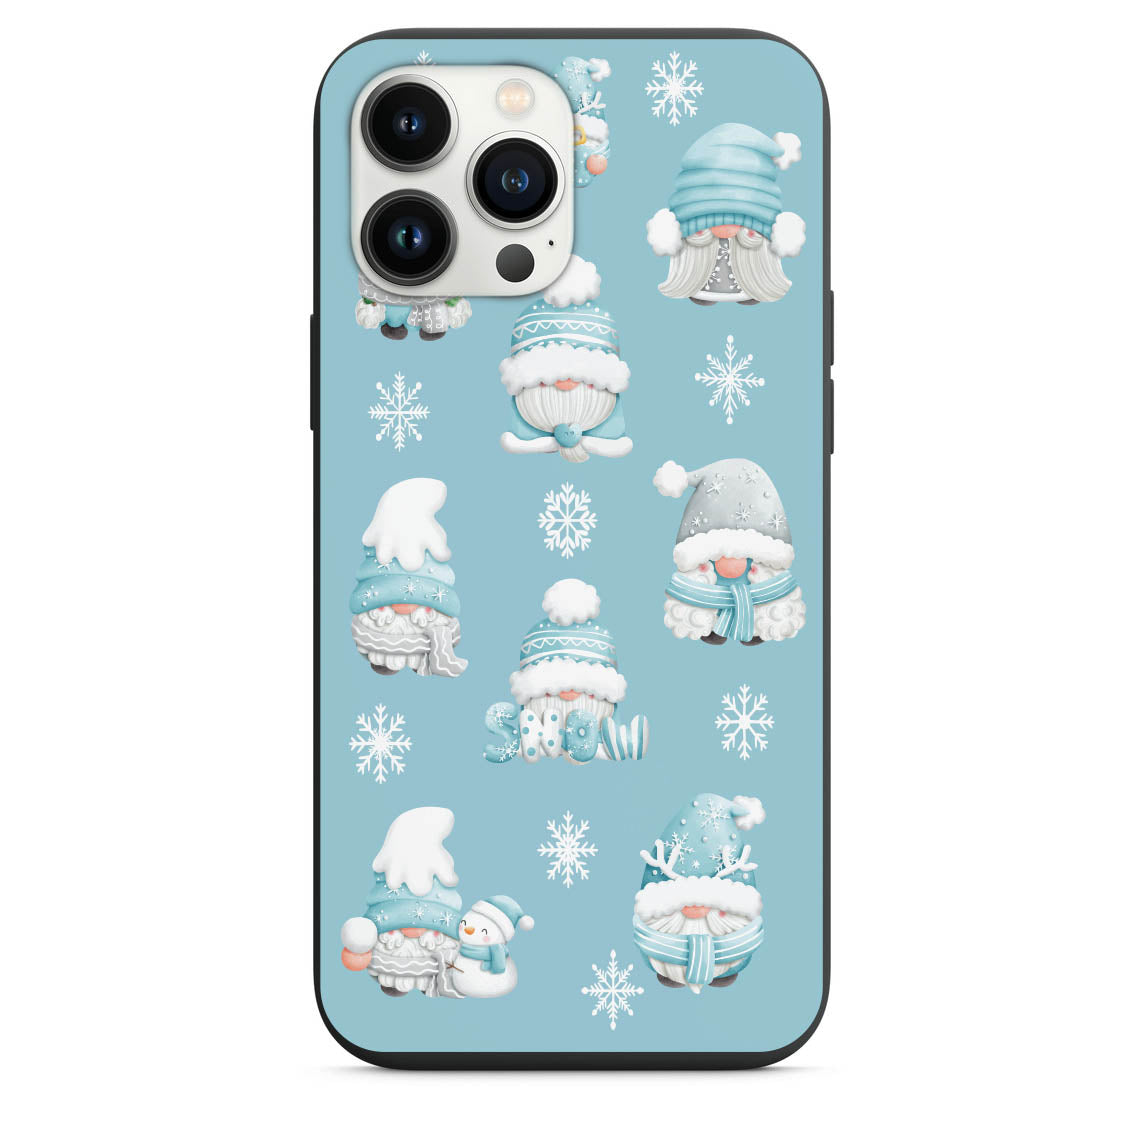 Cute Gnomes All Bundled Up In The Snow Design Phone Case for iPhone 7 8 X XS XR SE 11 12 13 14 Pro Max Mini Note s10 s10plus s20 s21 20plus